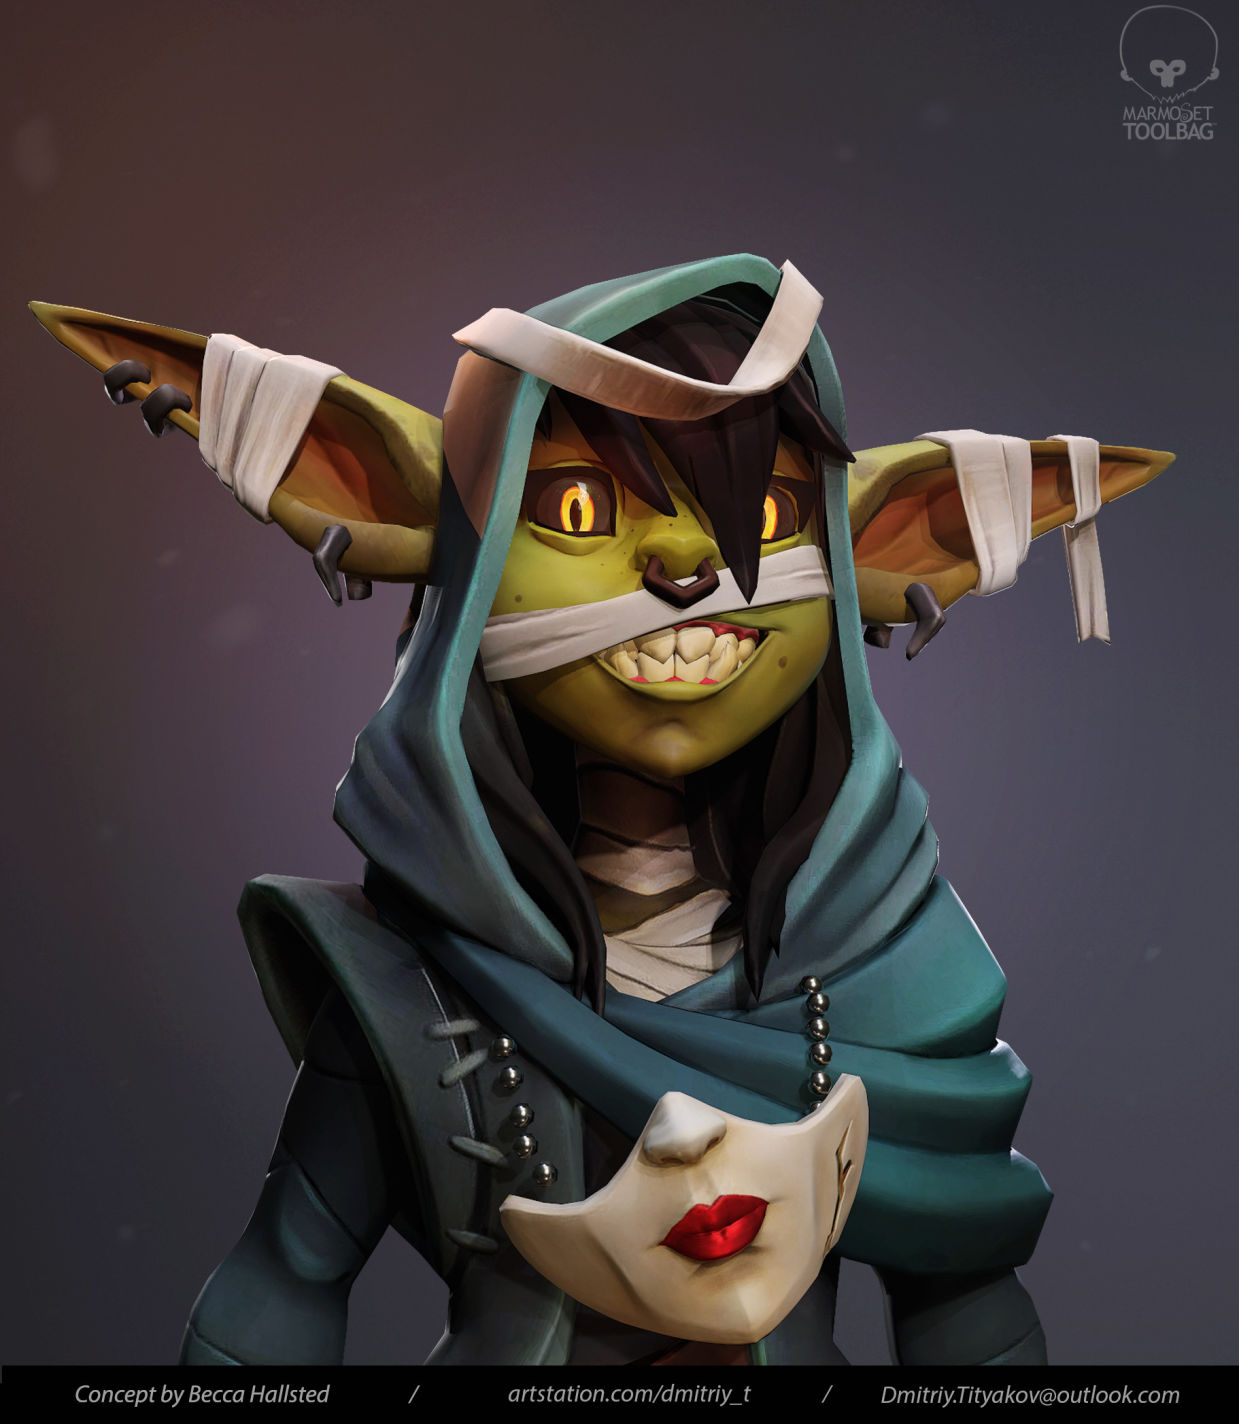 zbrush - create your own toon 3d characters